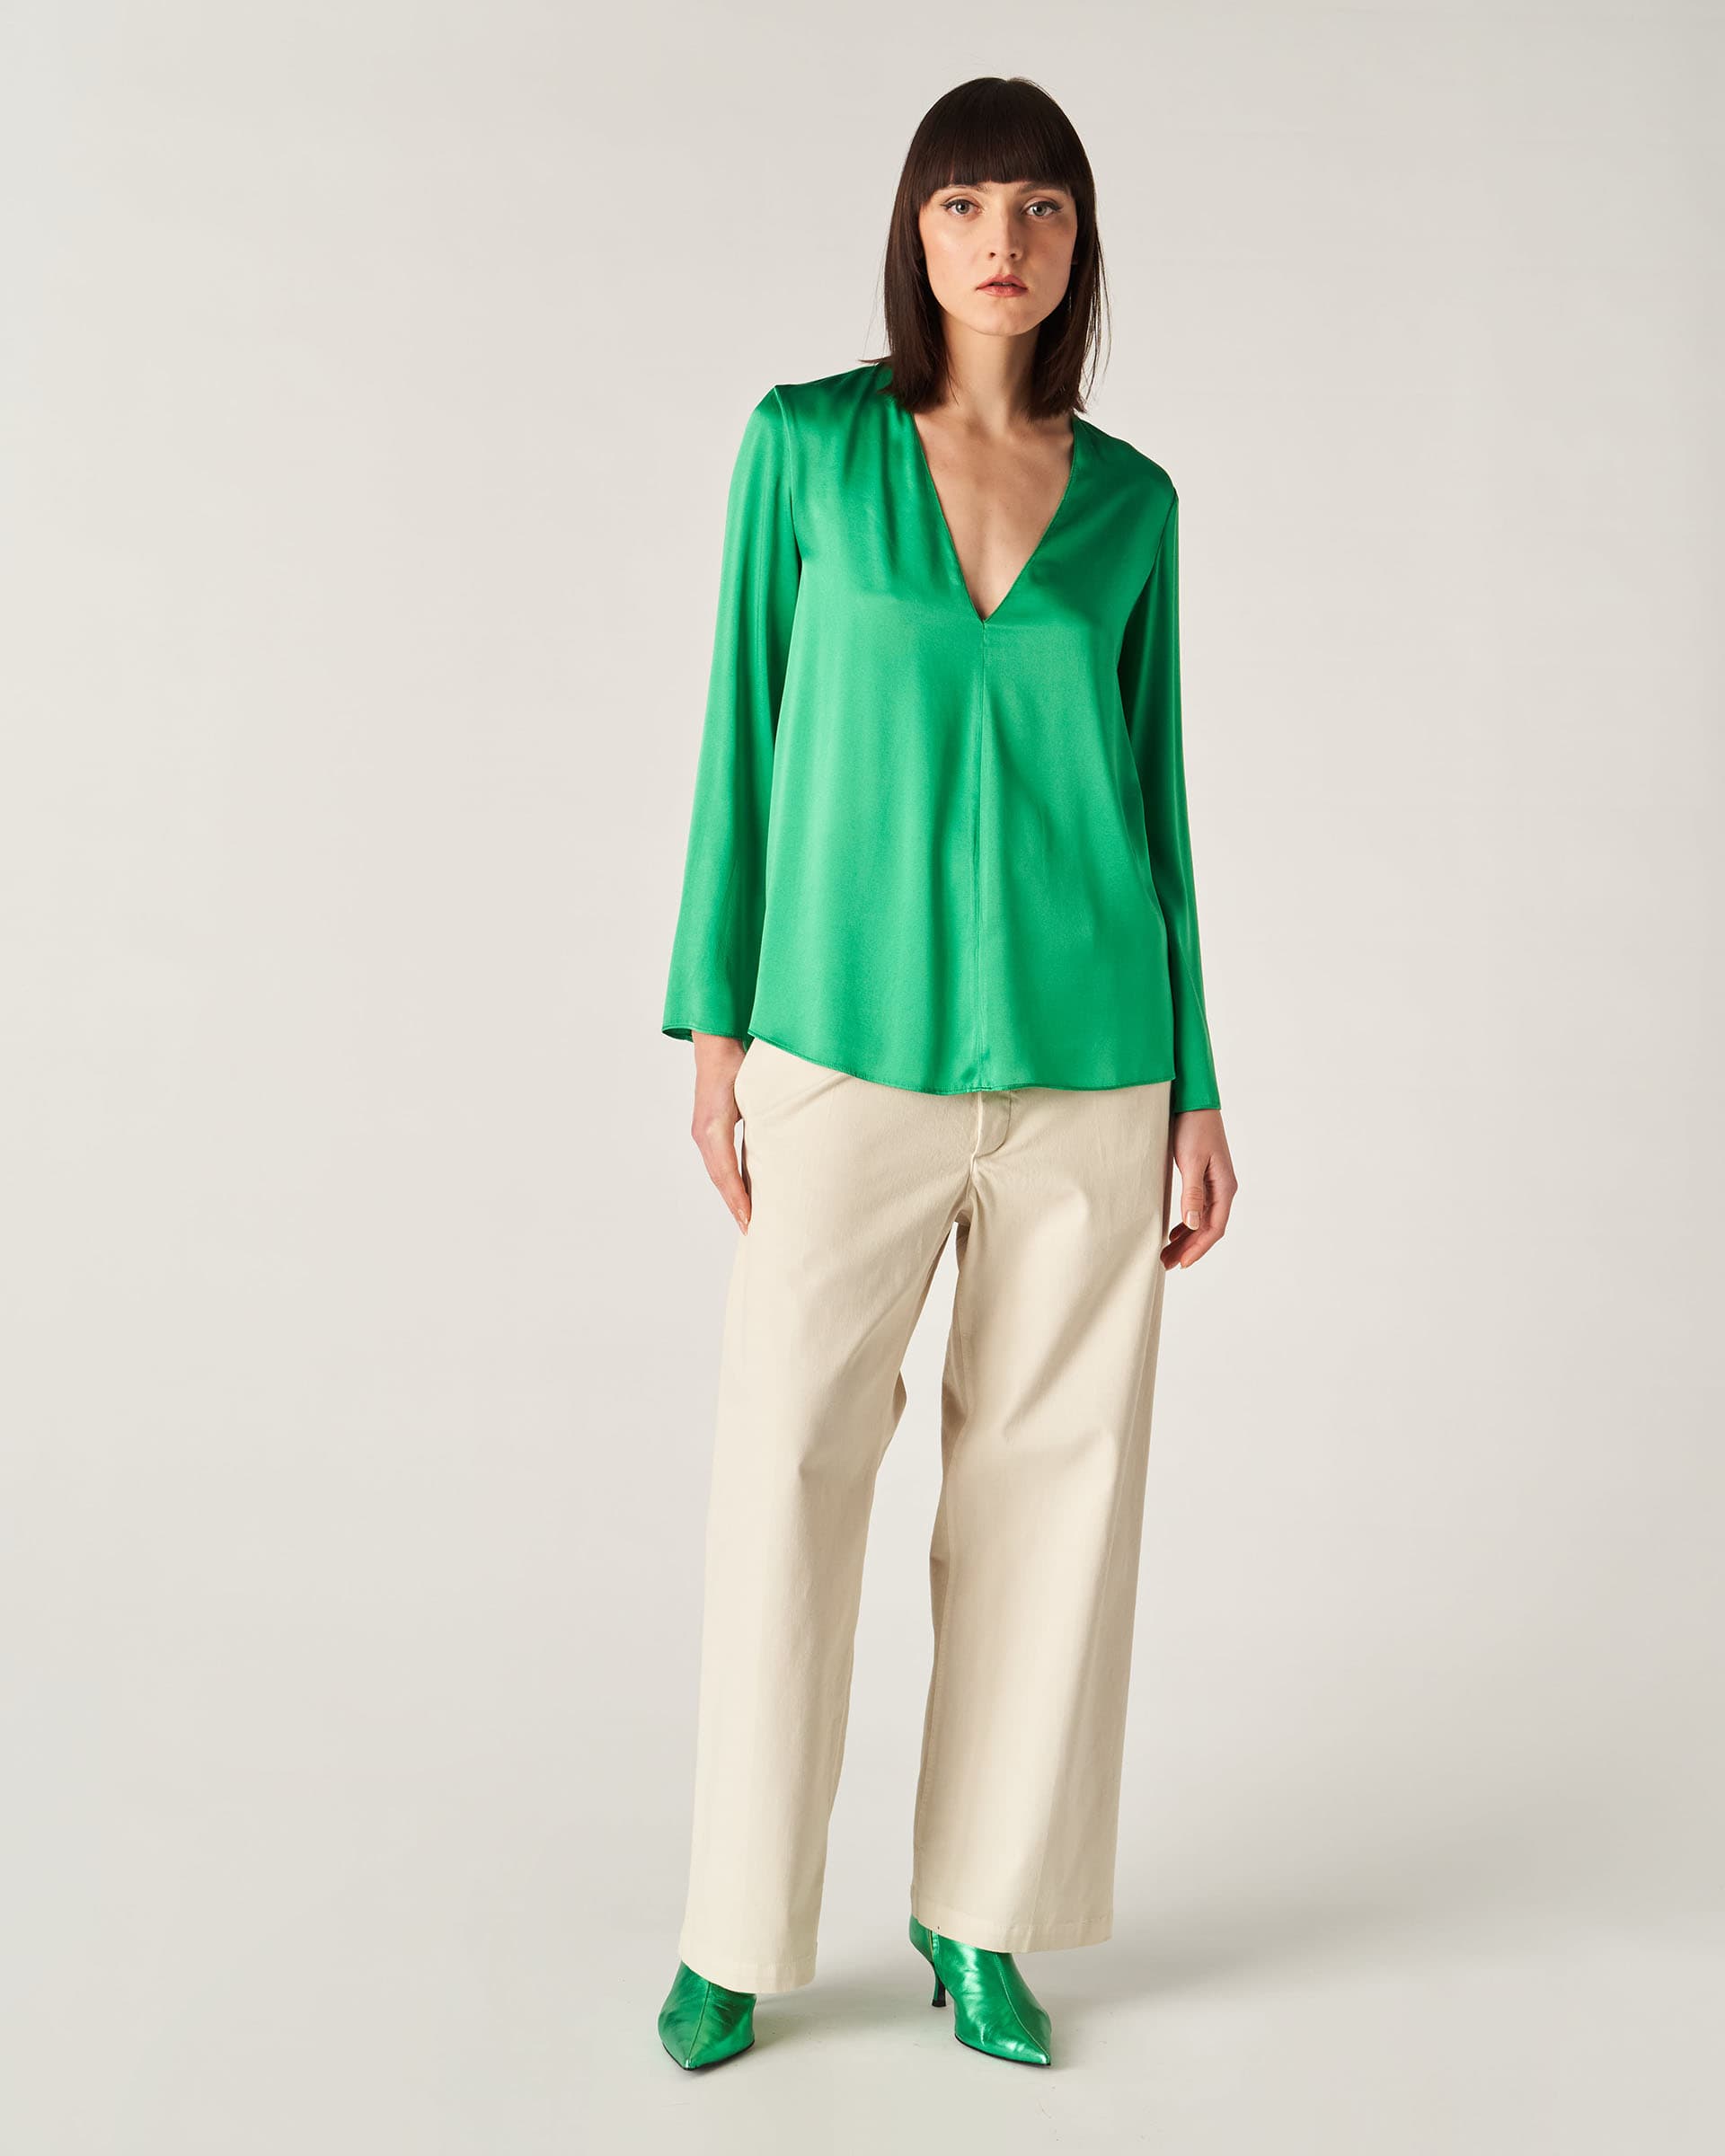 The Market Store | Satin Top With V-neck